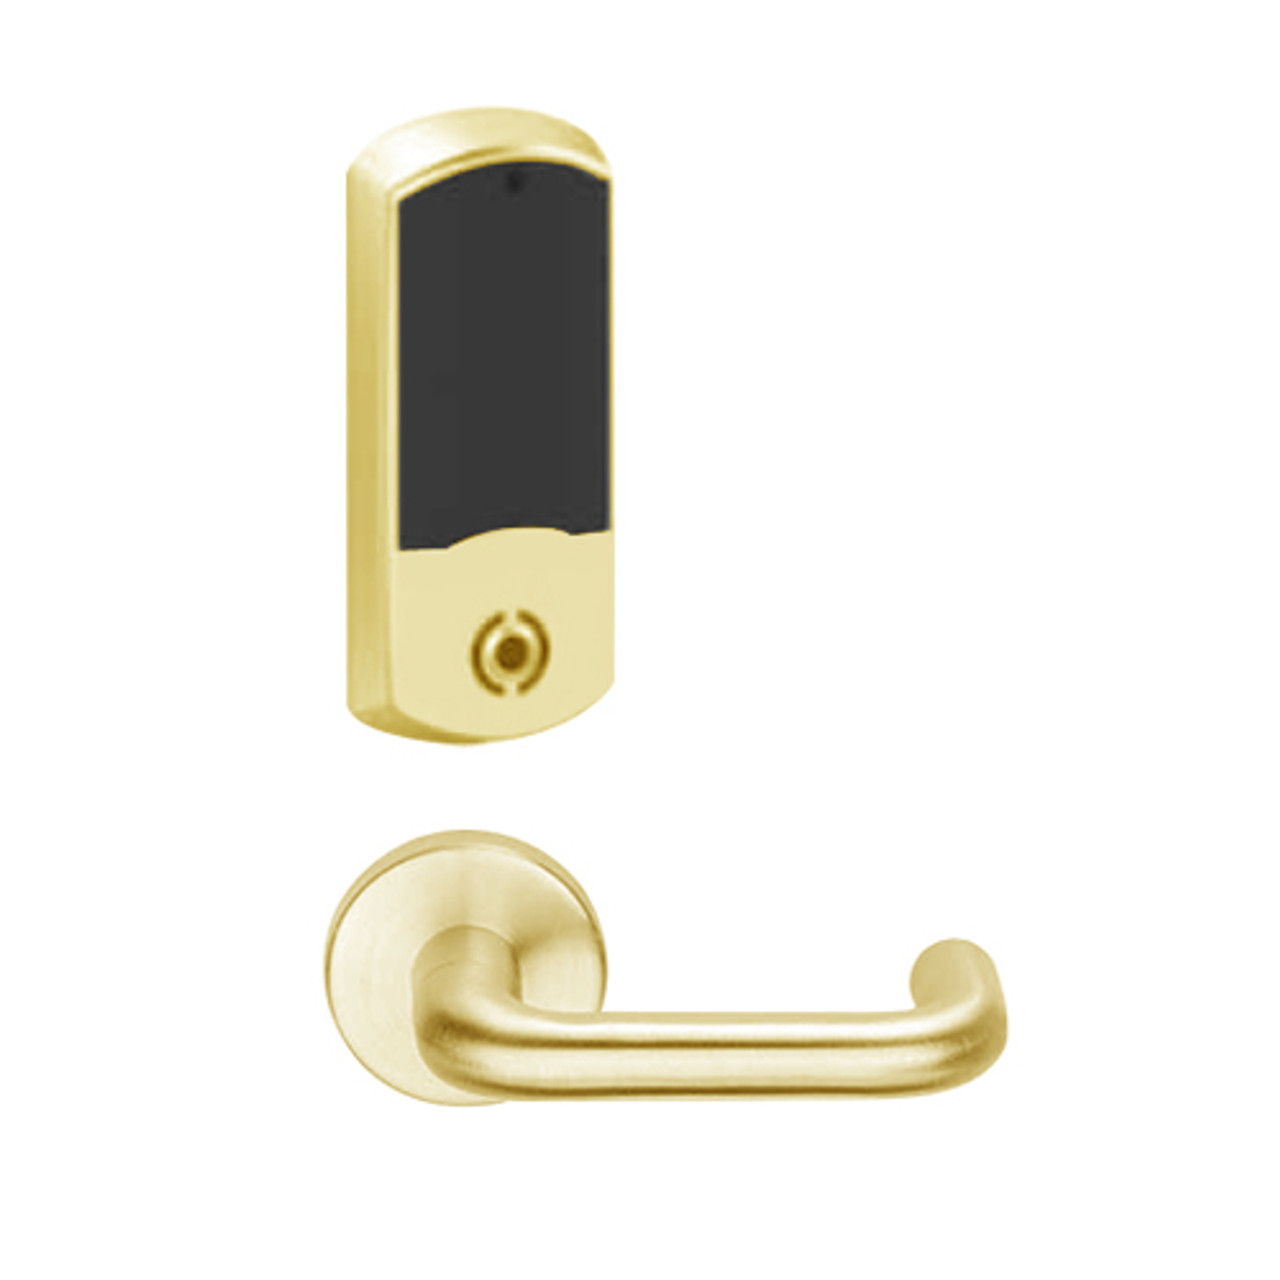 LEMS-GRW-J-03-605-00B Schlage Storeroom Wireless Greenwich Mortise Lock with LED Indicator and Tubular Lever Prepped for FSIC in Bright Brass